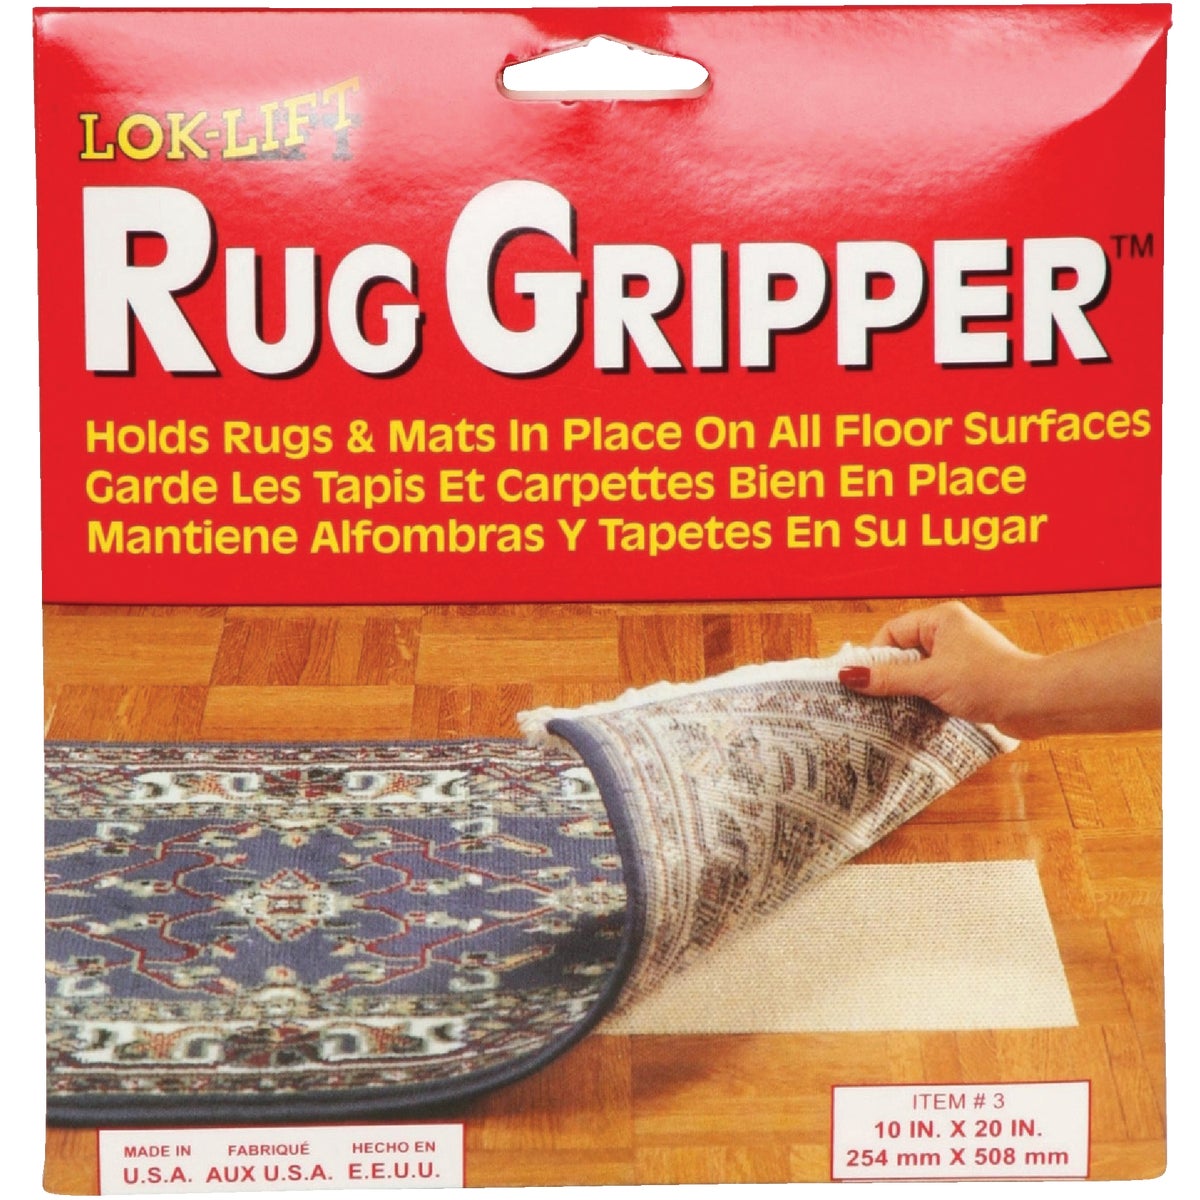 Item 260370, Lok-Lift rug gripper is designed to hold small rugs and mats in place on 